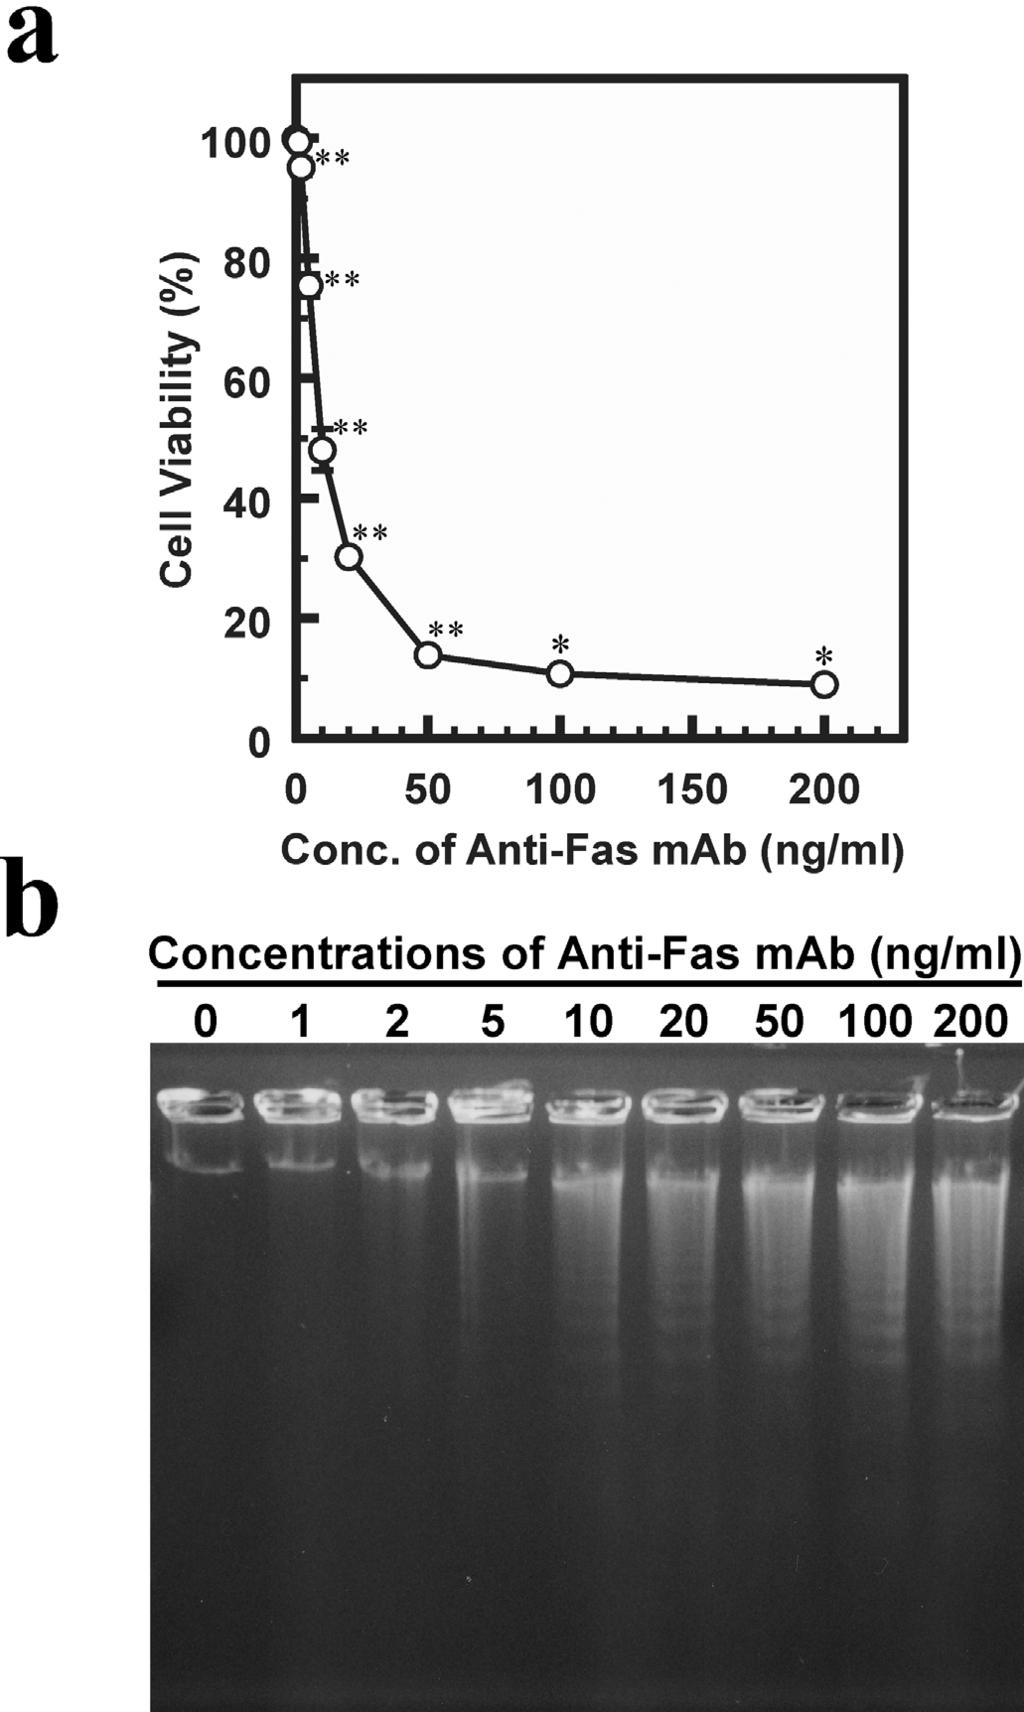 H.Abe, M.-A.Shibata and Y.Otsuki Figure 2. Cell viability (a) and DNA fragmentation (b) in human endometrial carcinoma cell line (HHUA) cells exposed to anti-fas mab.